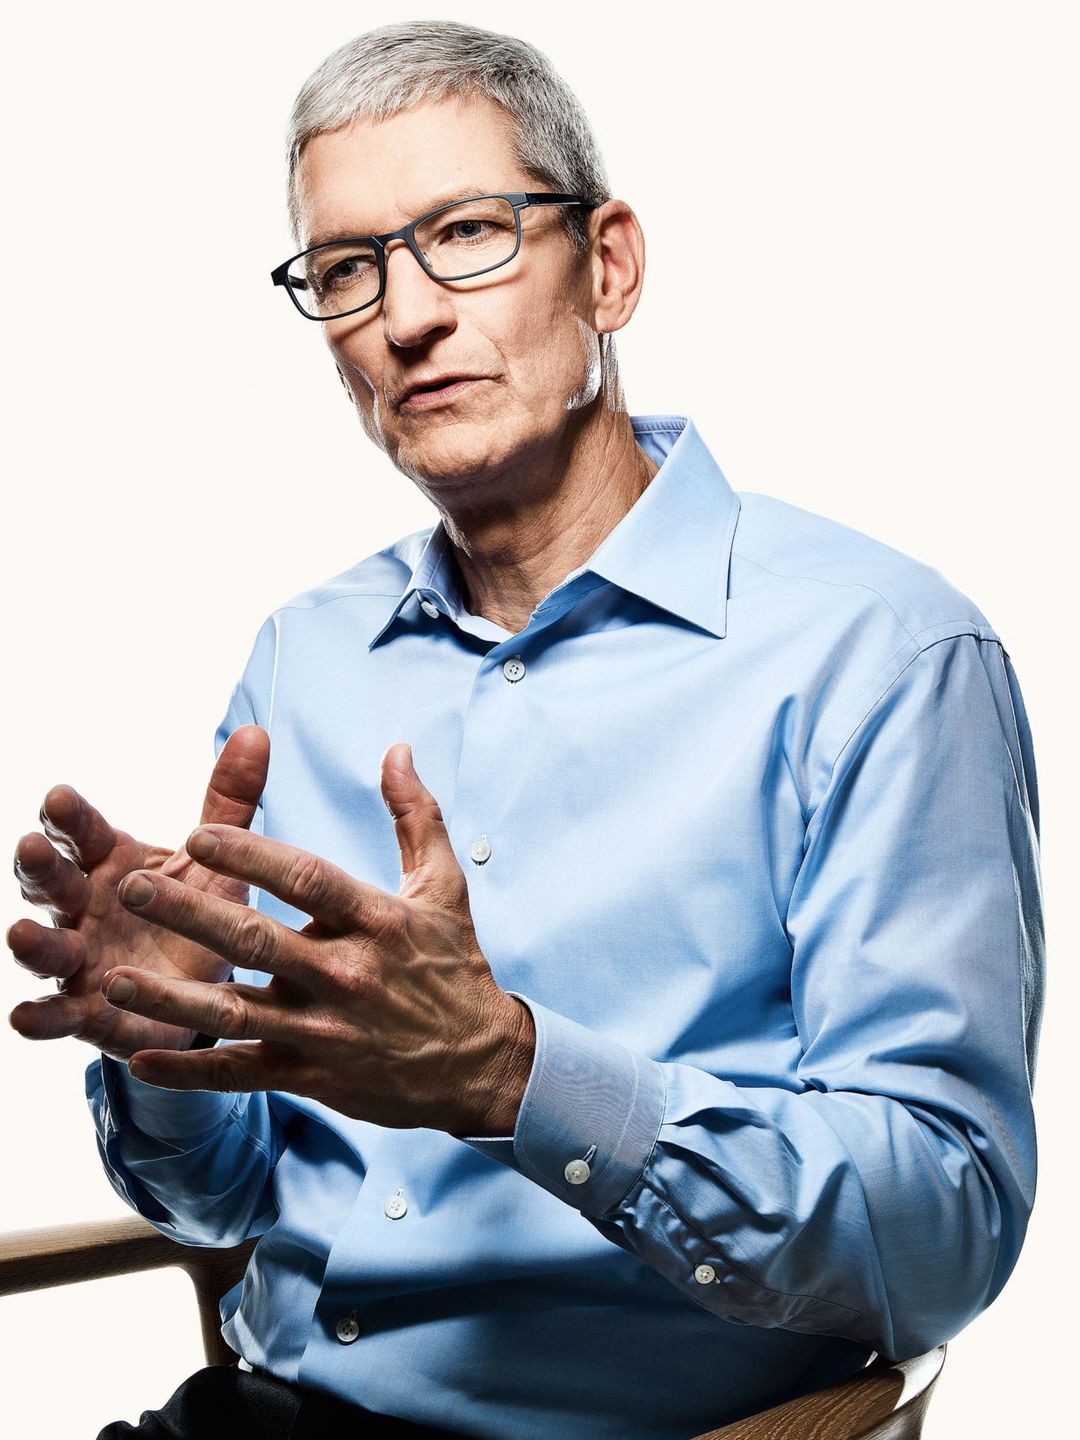 Tim Cook how old is he